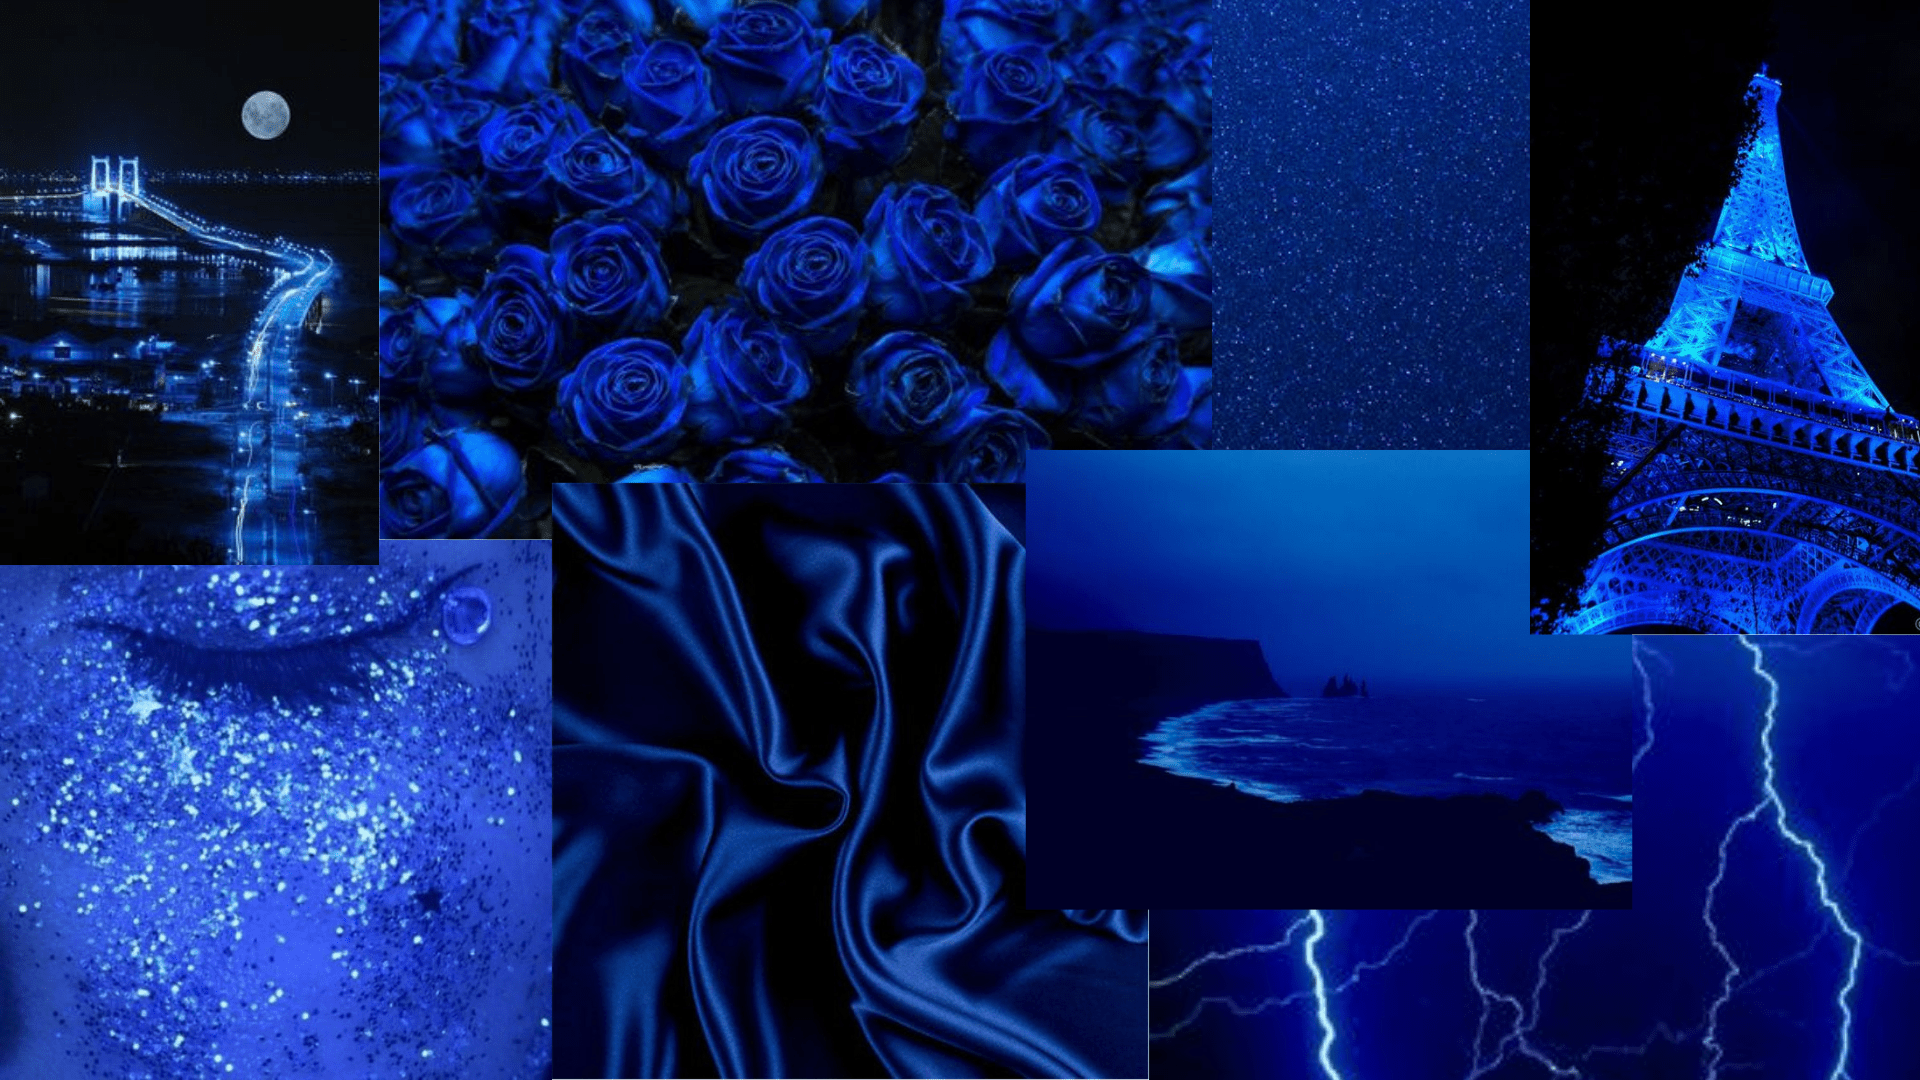 A collage of blue aesthetic images including roses, lightning, and the Eiffel Tower. - Dark blue, indigo, navy blue